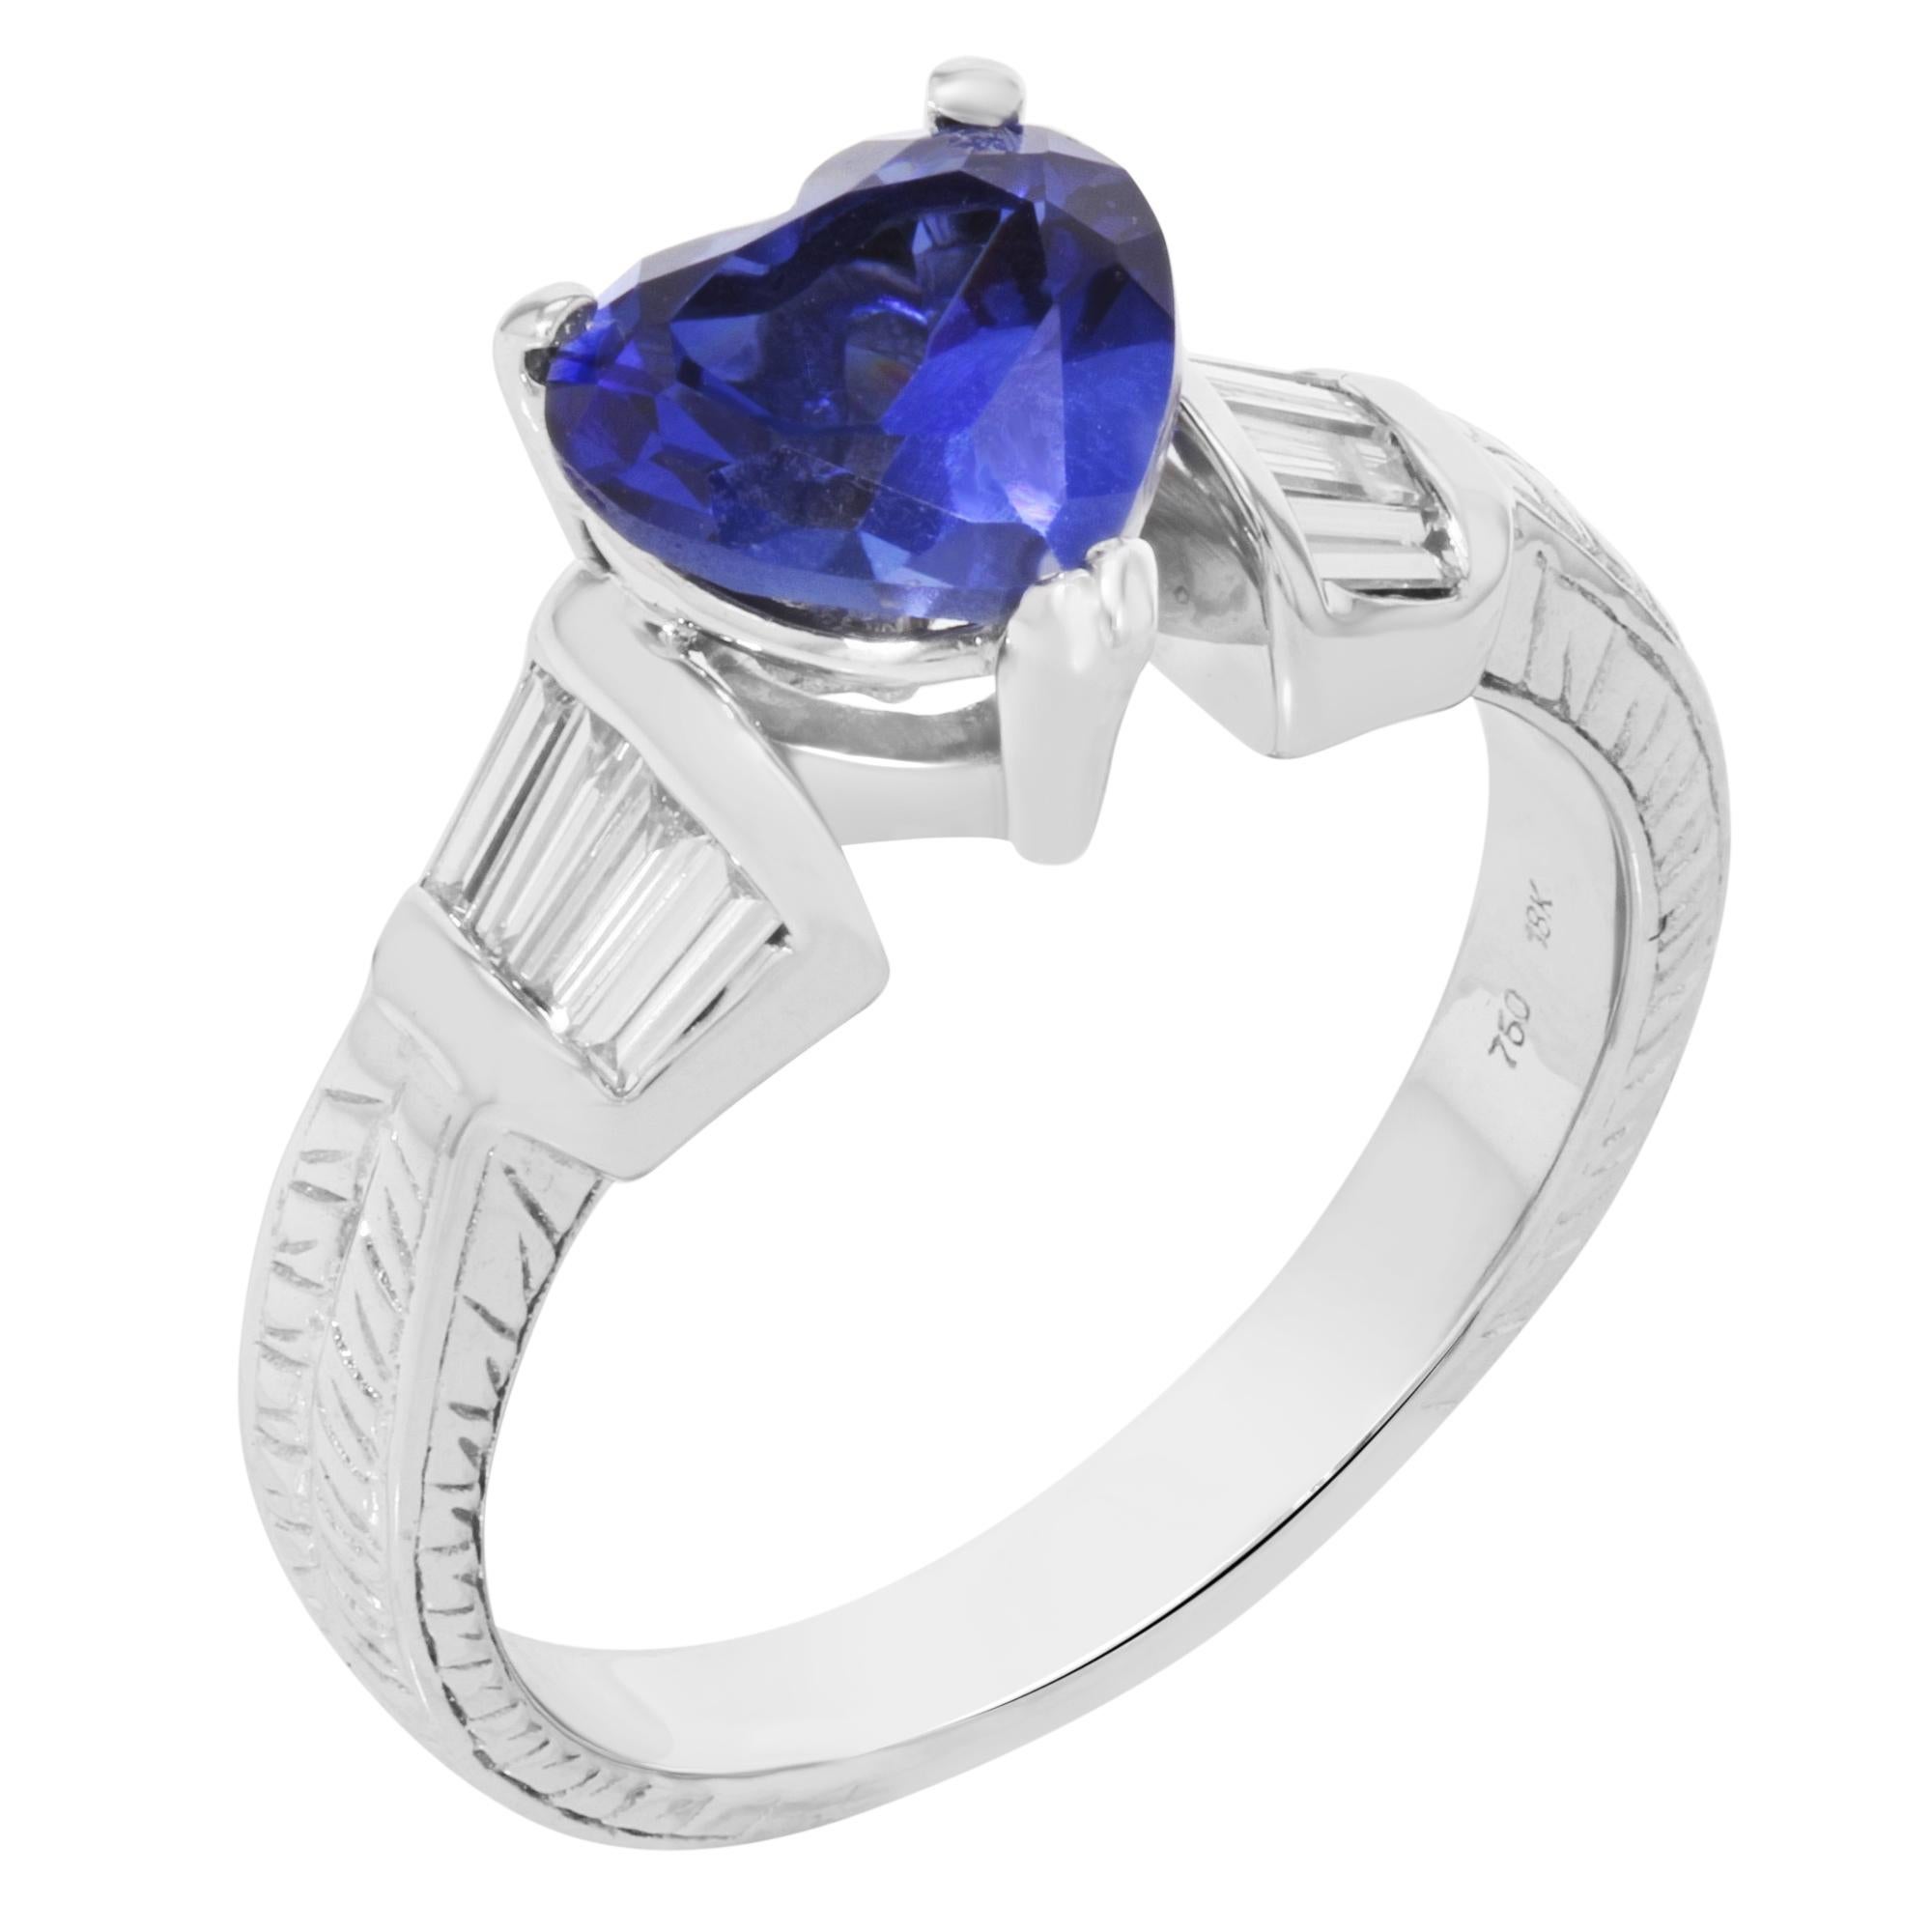 This stunning women's ring is crafted in 18K white gold with approximately 1.25 carats of heart-shaped blue sapphire and 0.30 carat of baguette cut diamonds. Ring size: 6.5. Total weight: 6.4 grams. Comes in a presentable gift box. 